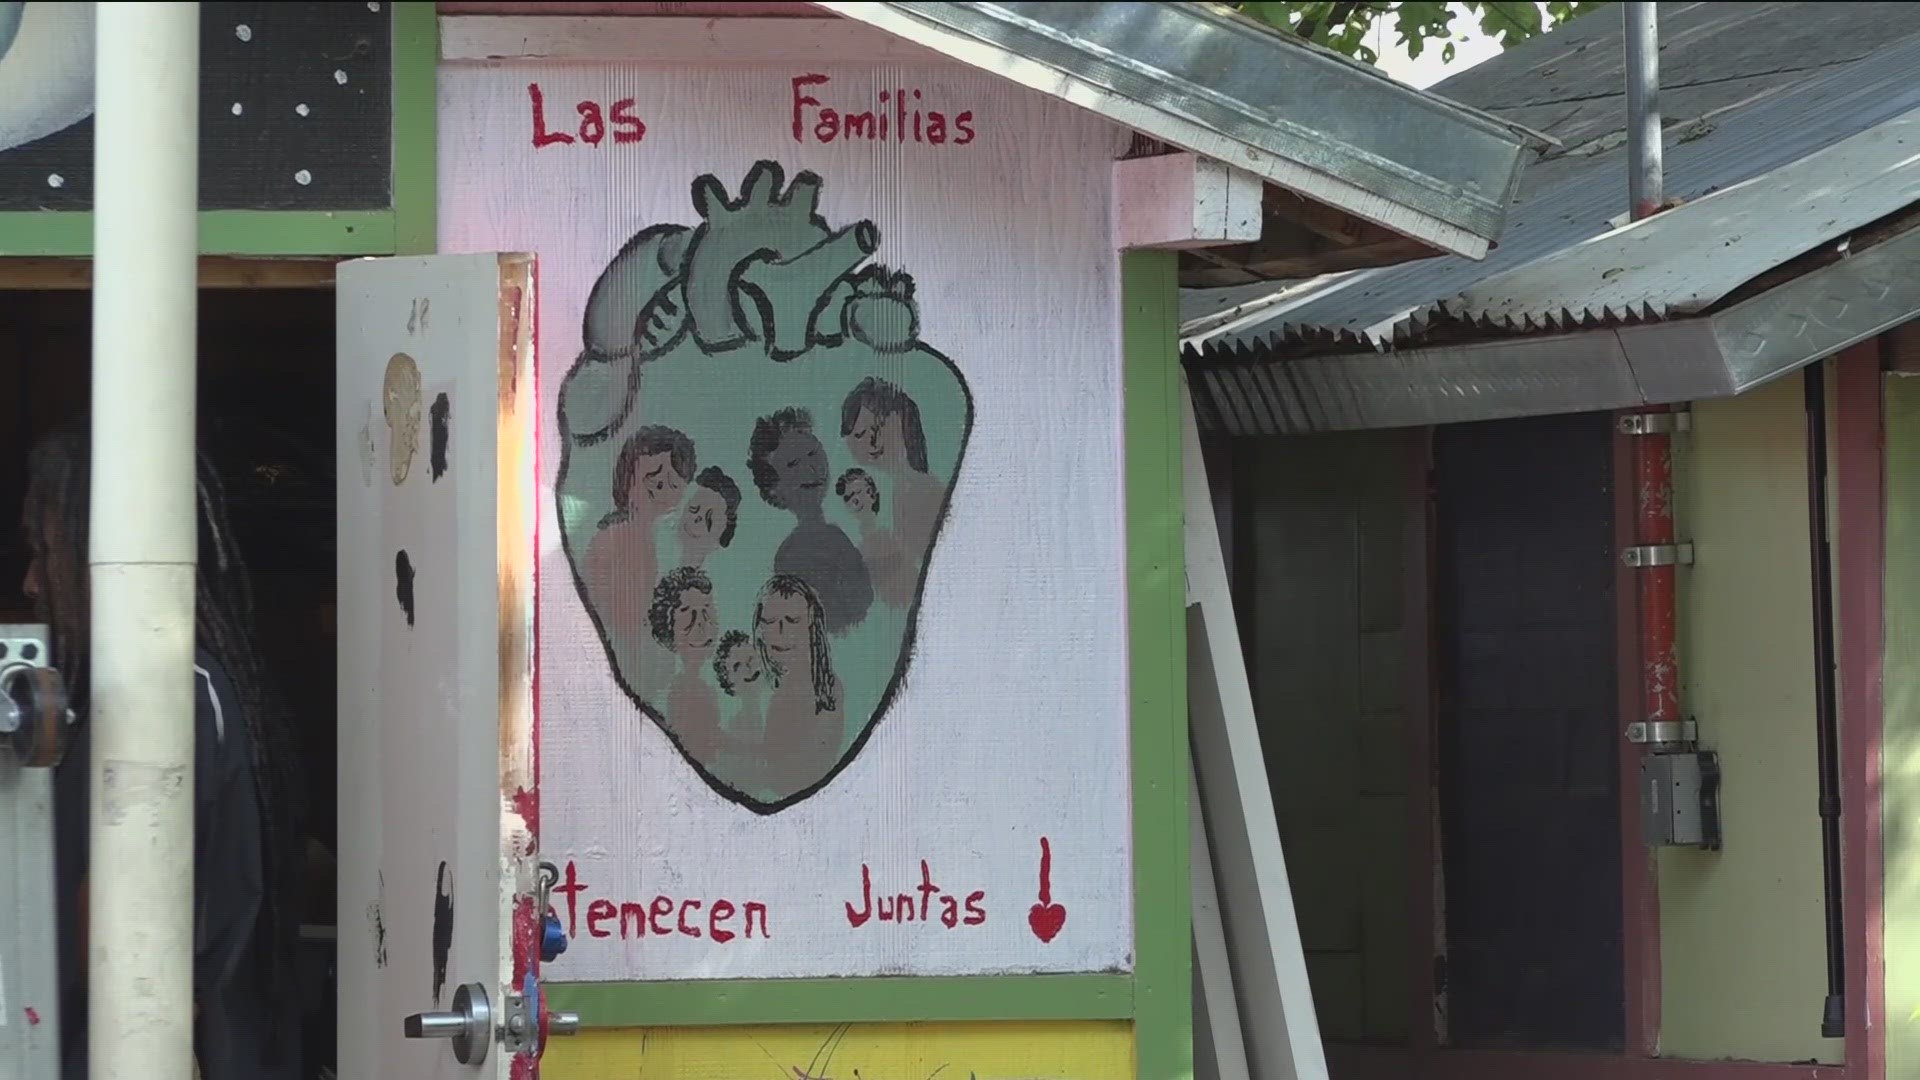 Casa Marianella in East Austin takes in migrants of all backgrounds, during which time they gain access to medical care, legal services and English classes.